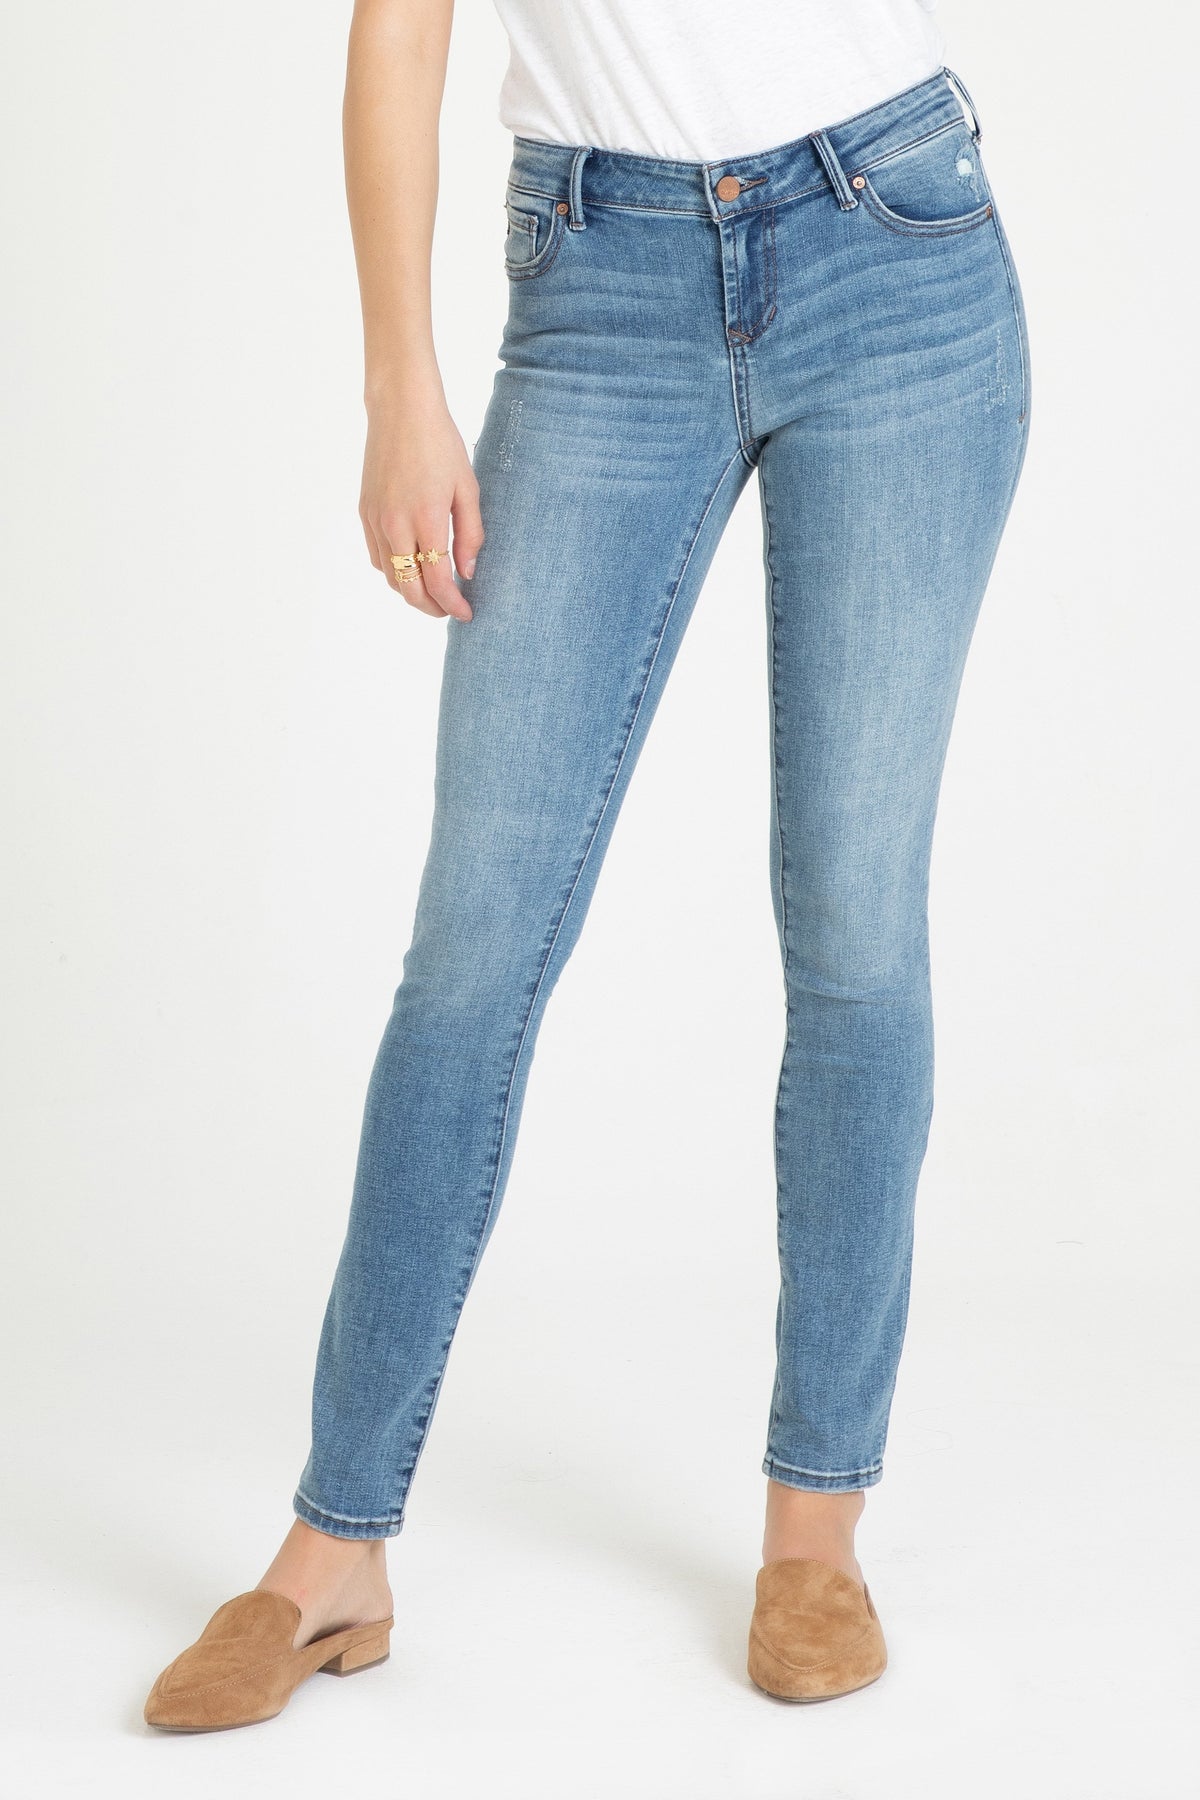 Kyle Mid Rise Skinny Jean in Light Wash